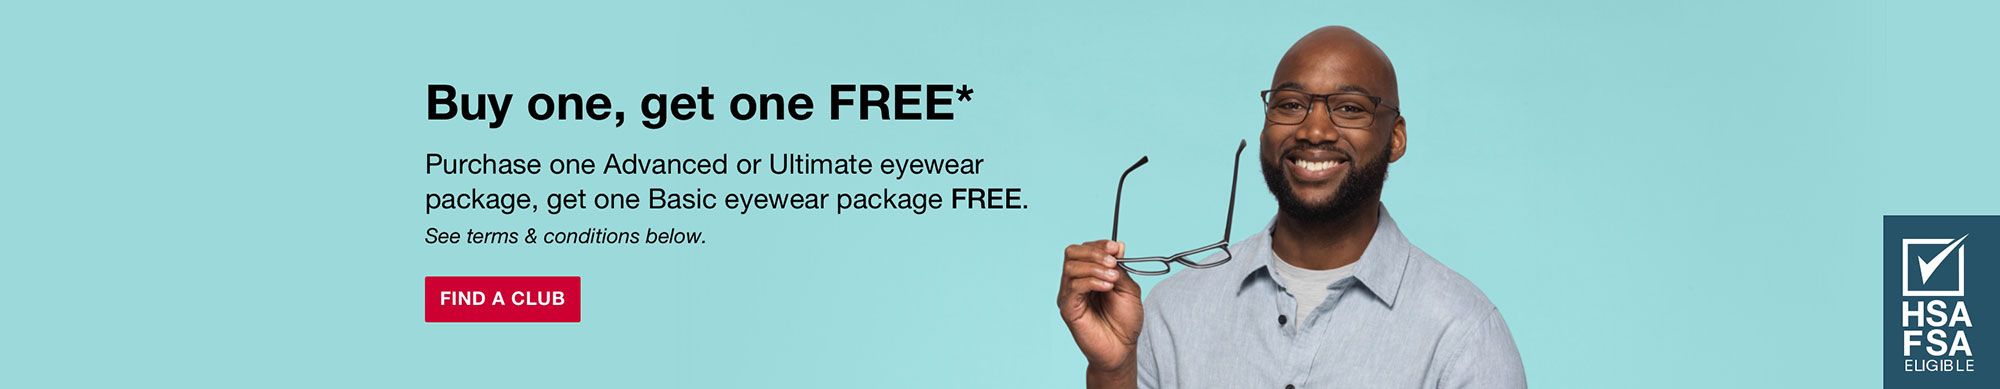 Buy one, get one FREE*. Purchase one Advanced or Ultimate eyewear package, get one Basic eyewear package FREE. See terms and conditions below. Click to find a club